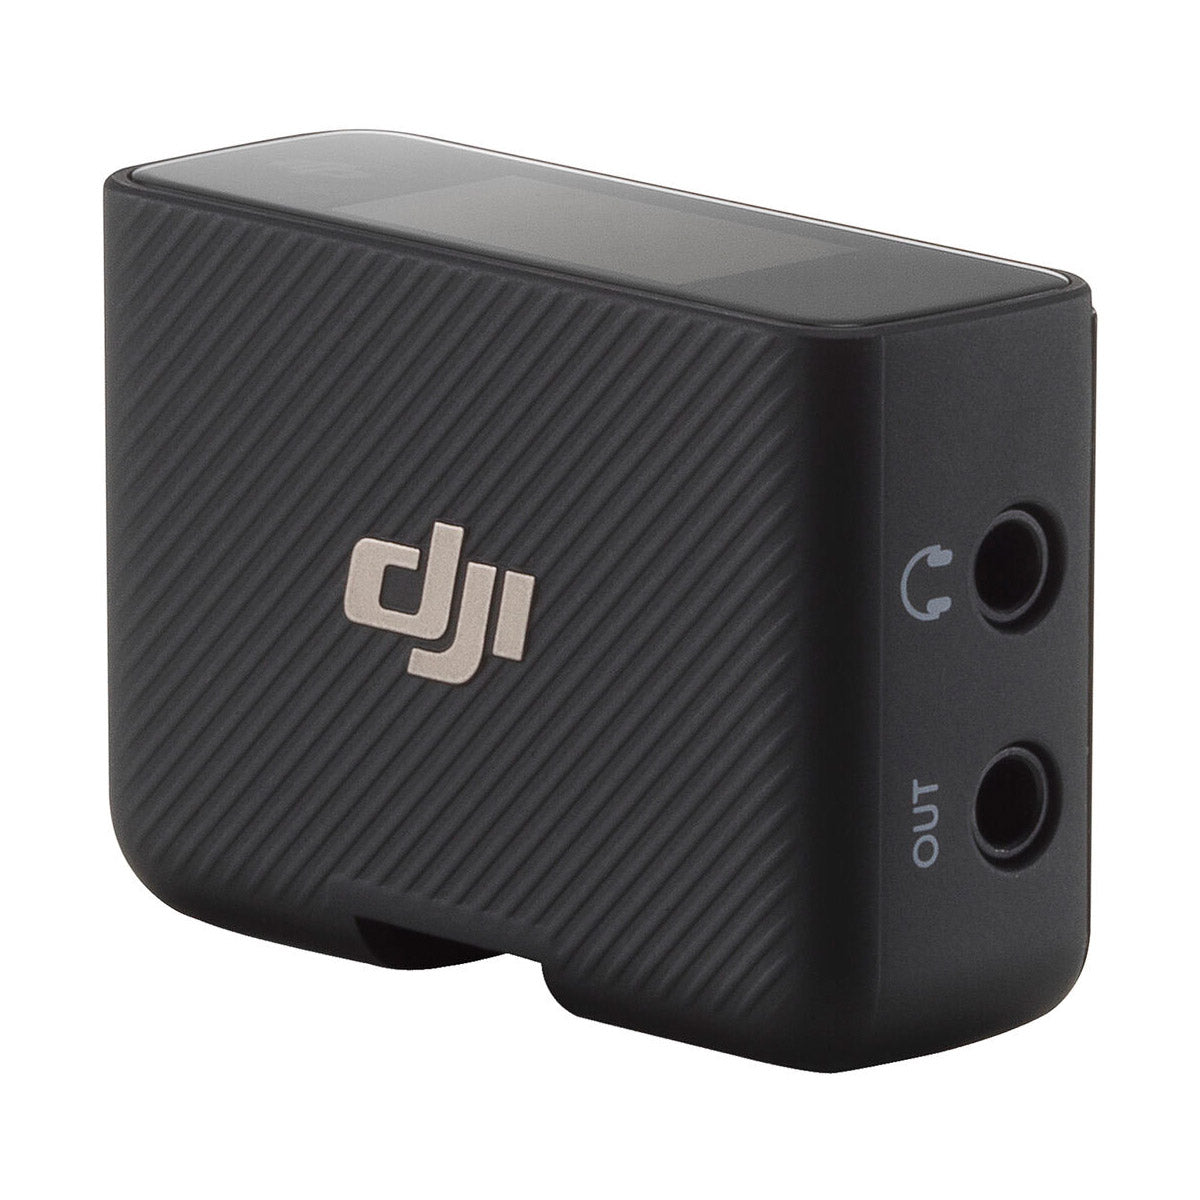 DJI 1-Microphone Compact Wireless Mic System for Camera & Smartphone (